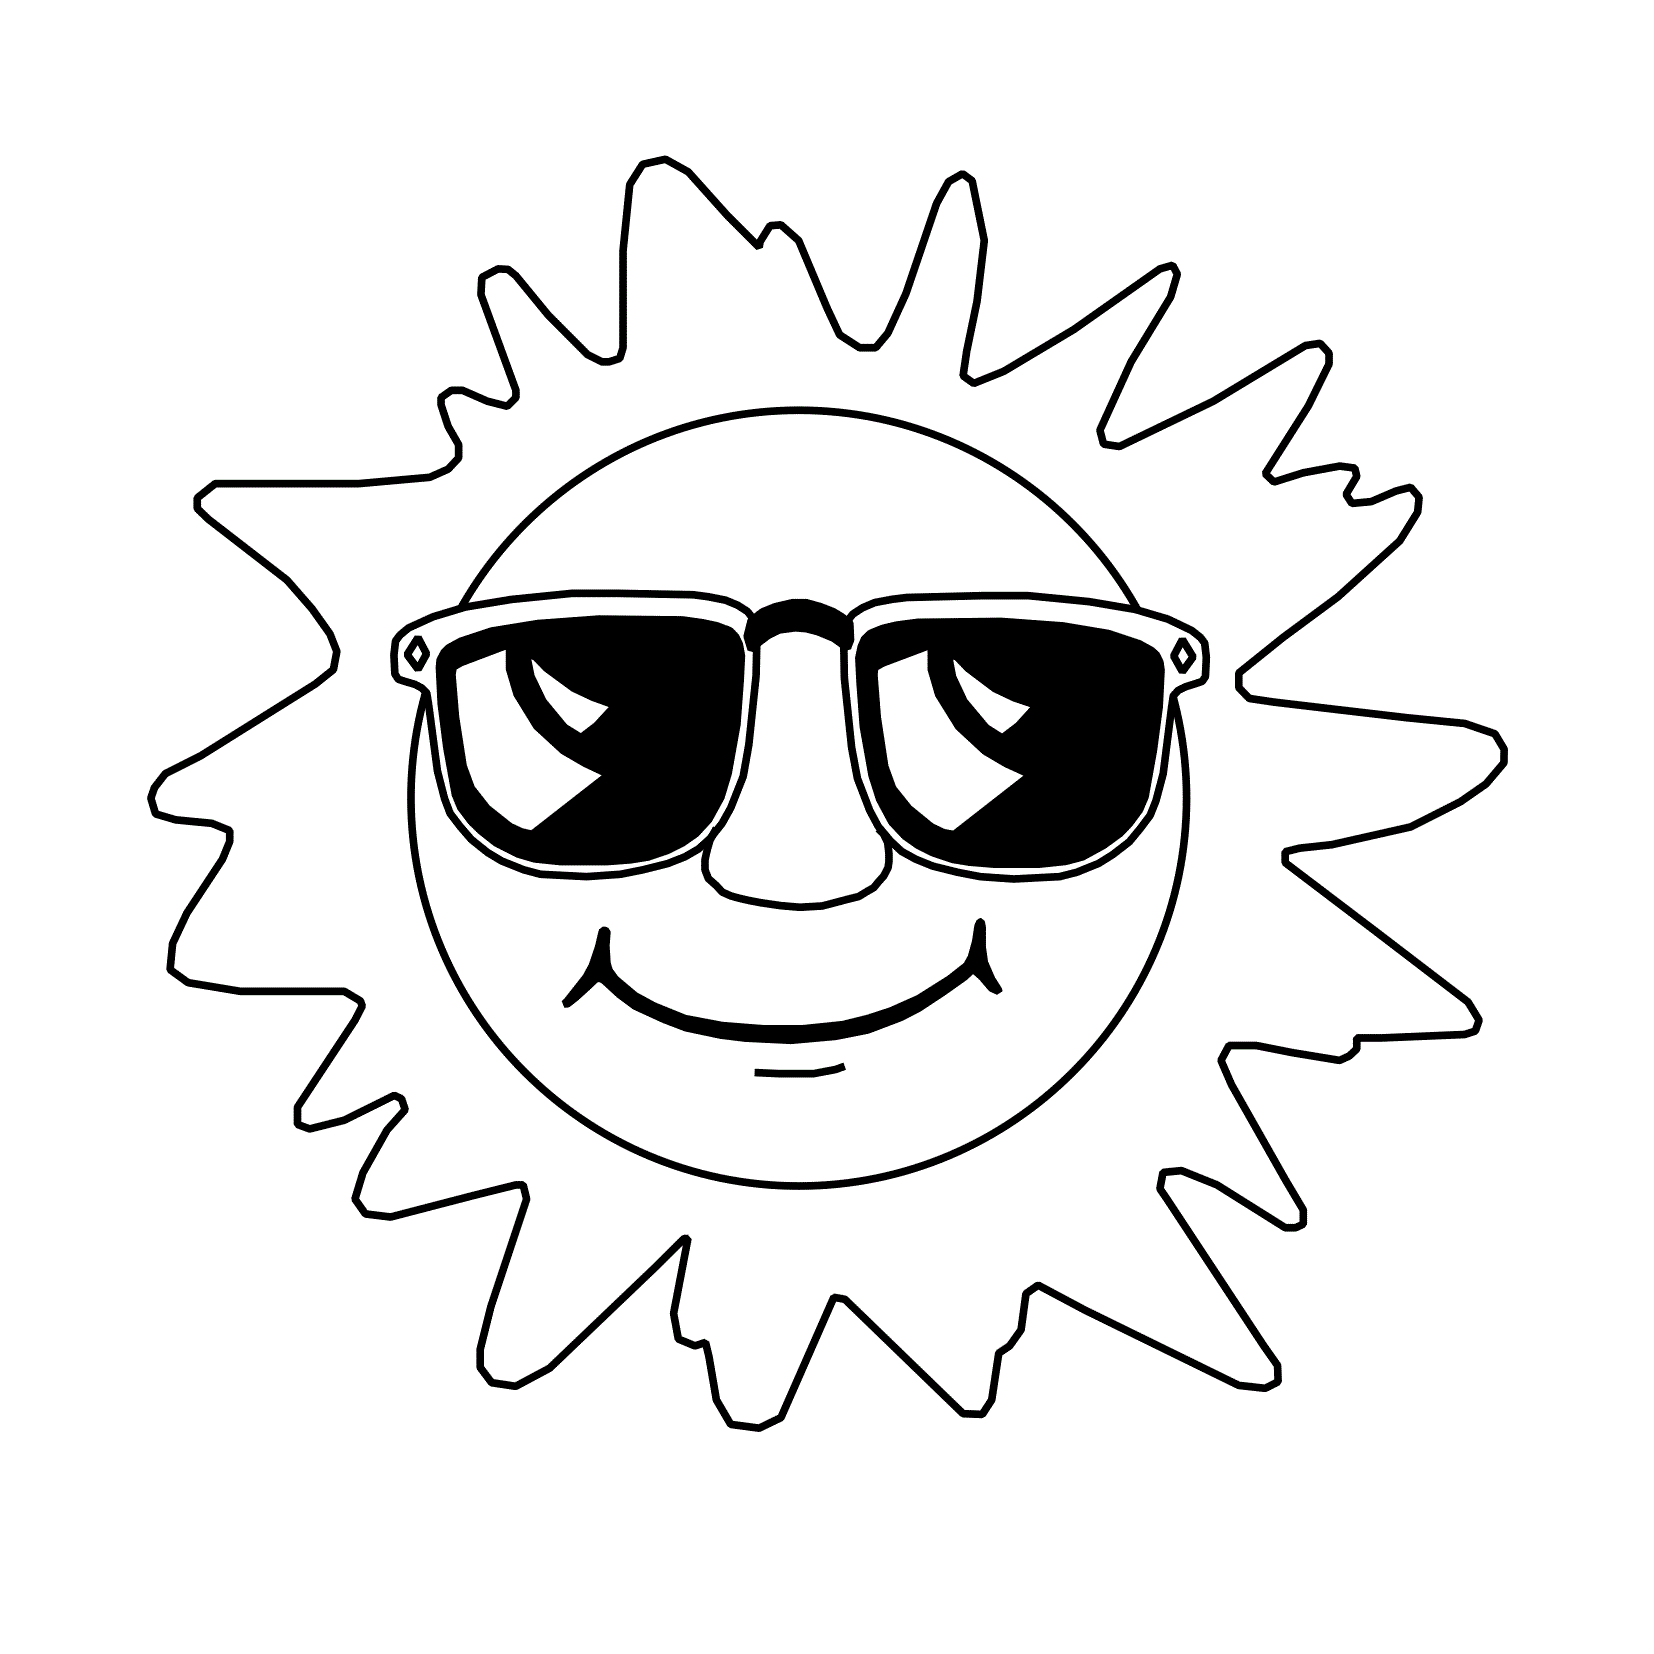 free black and white clipart of sun - photo #12